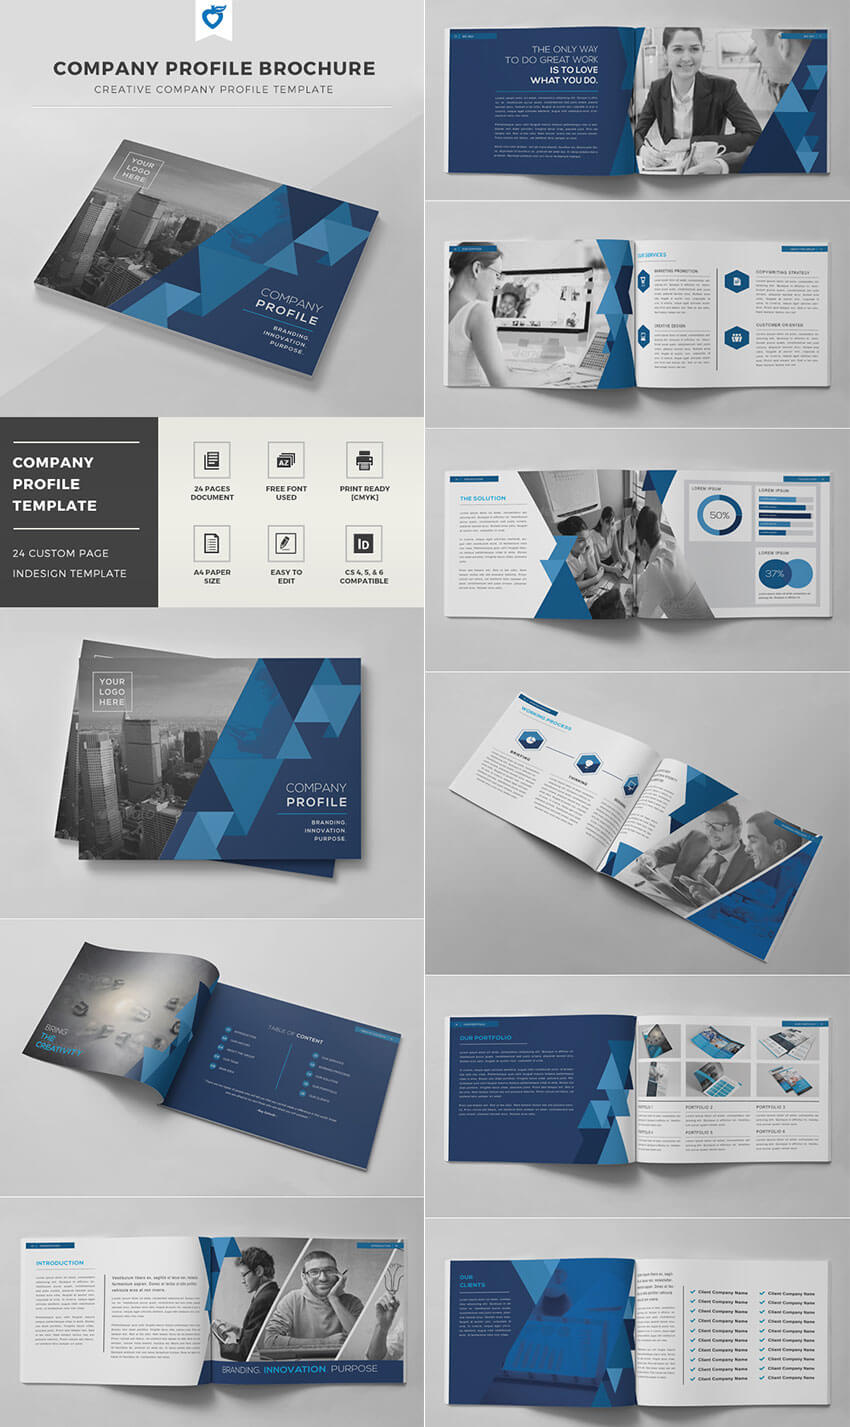 30 Best Indesign Brochure Templates – Creative Business In Indesign Templates Free Download Brochure